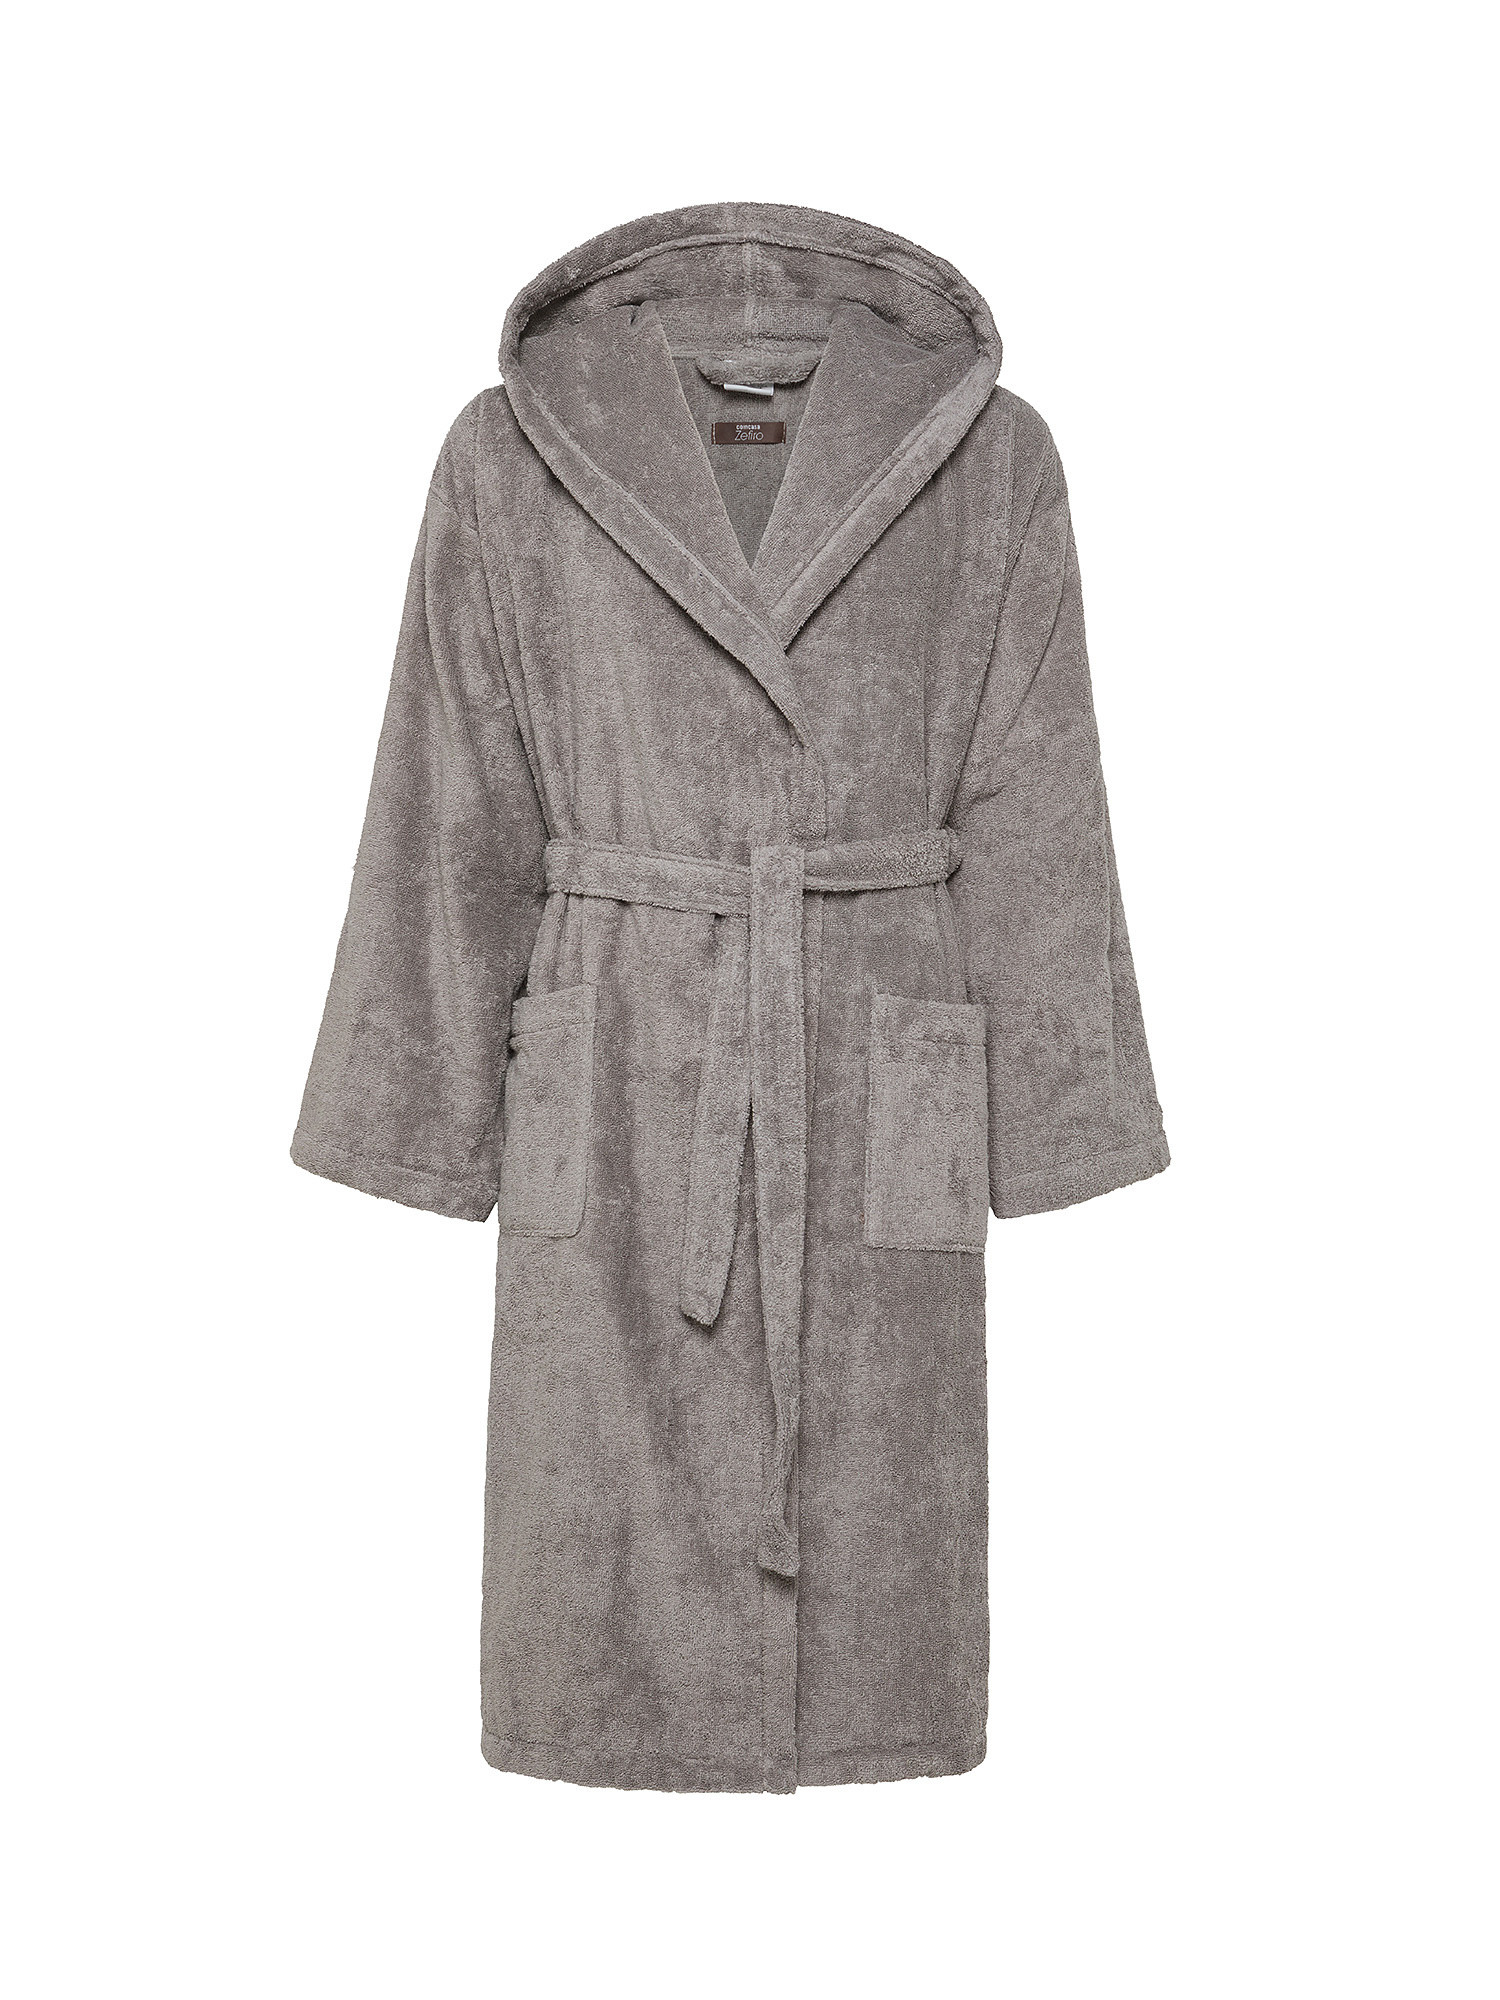 Zefiro solid color 100% cotton bathrobe, Grey, large image number 0